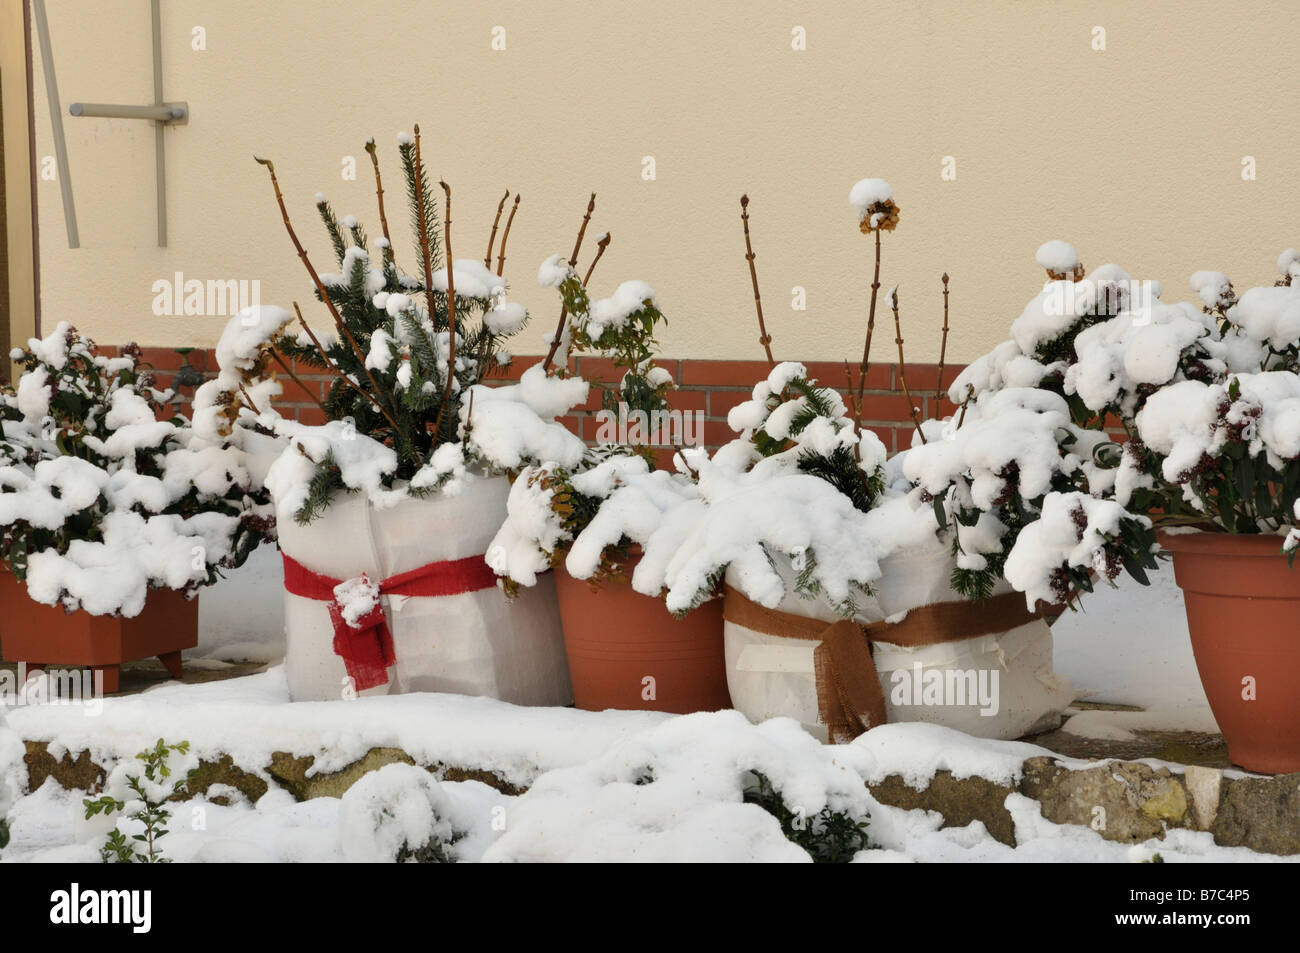 Snow-covered shrubs in tubs with winter protection Stock Photo